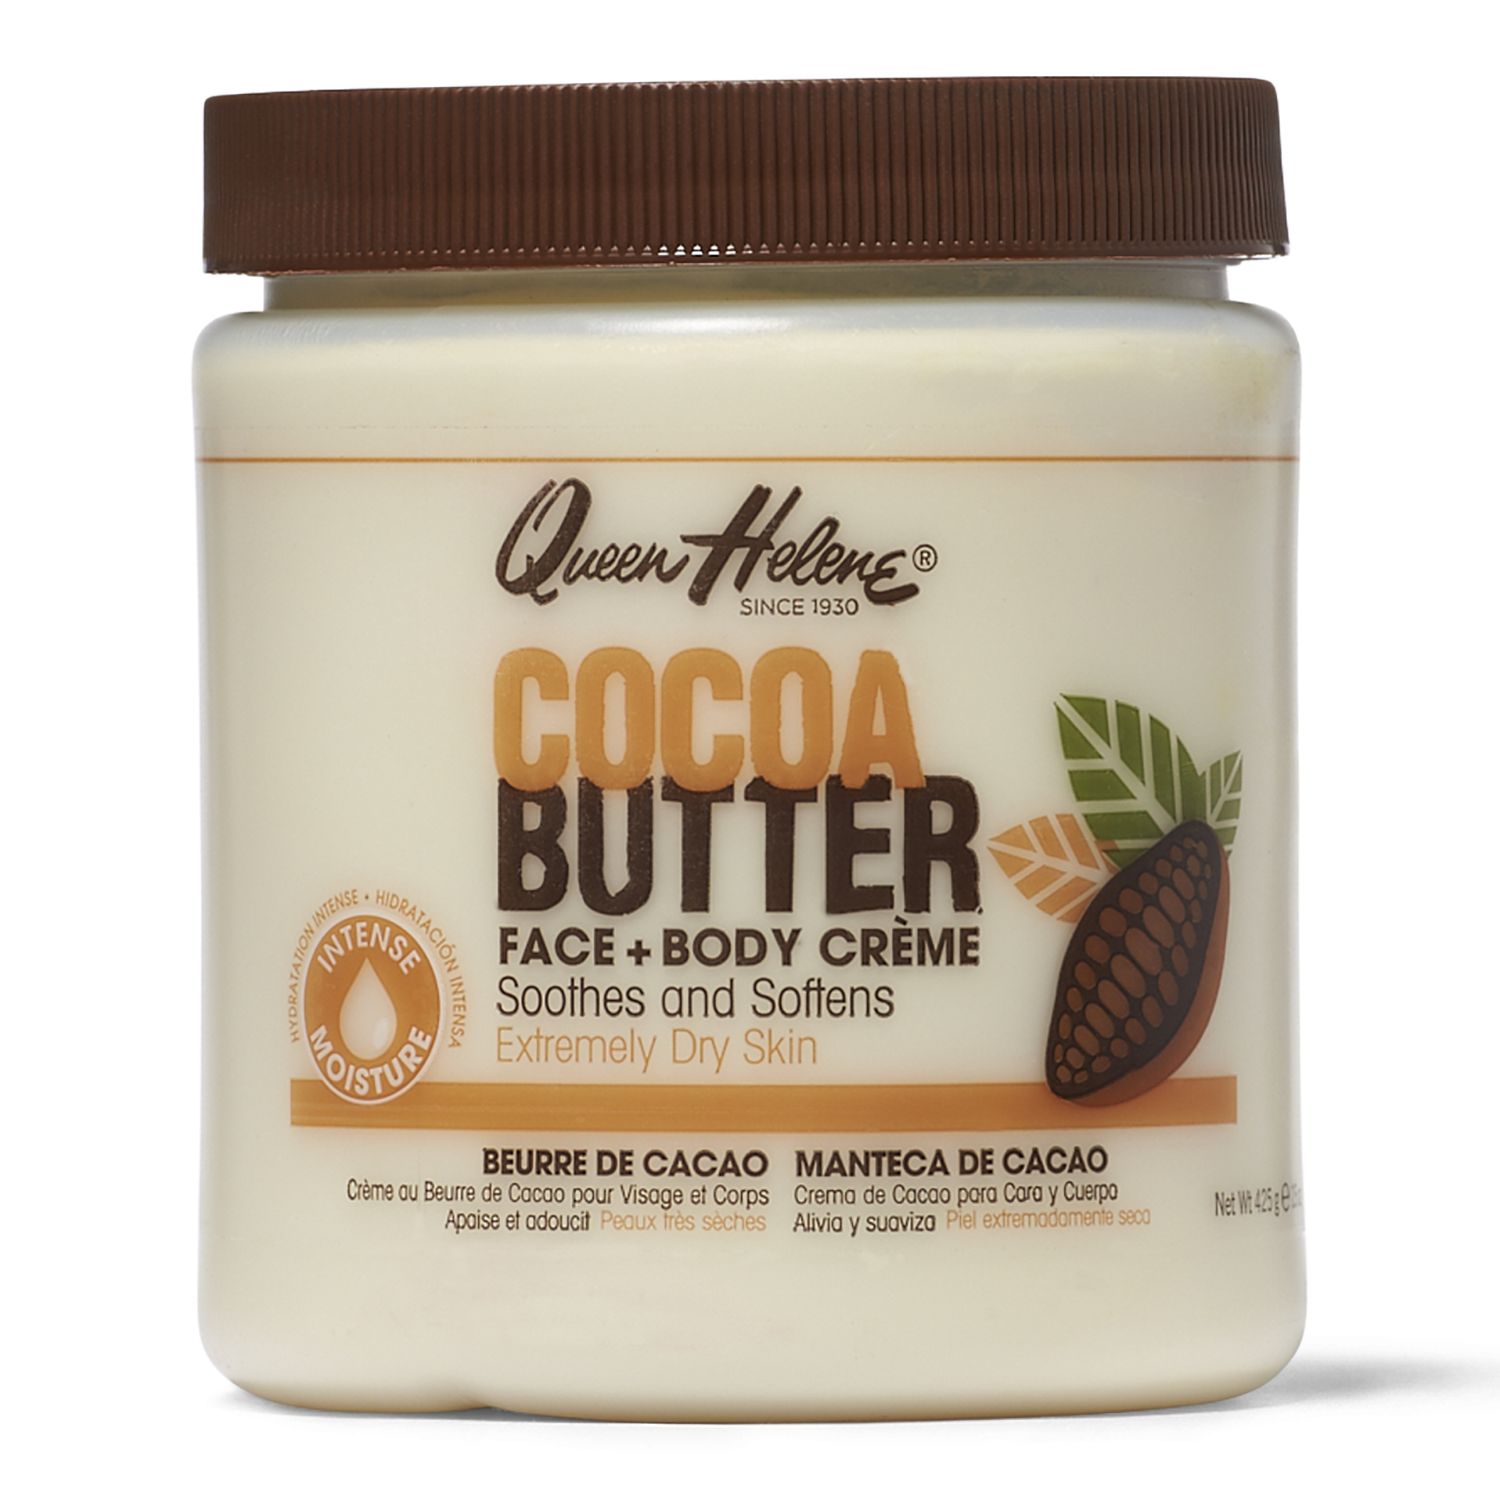 Queen Helene Cocoa Butter Crème Face & Body Lotion for Dry Skin, 15 oz